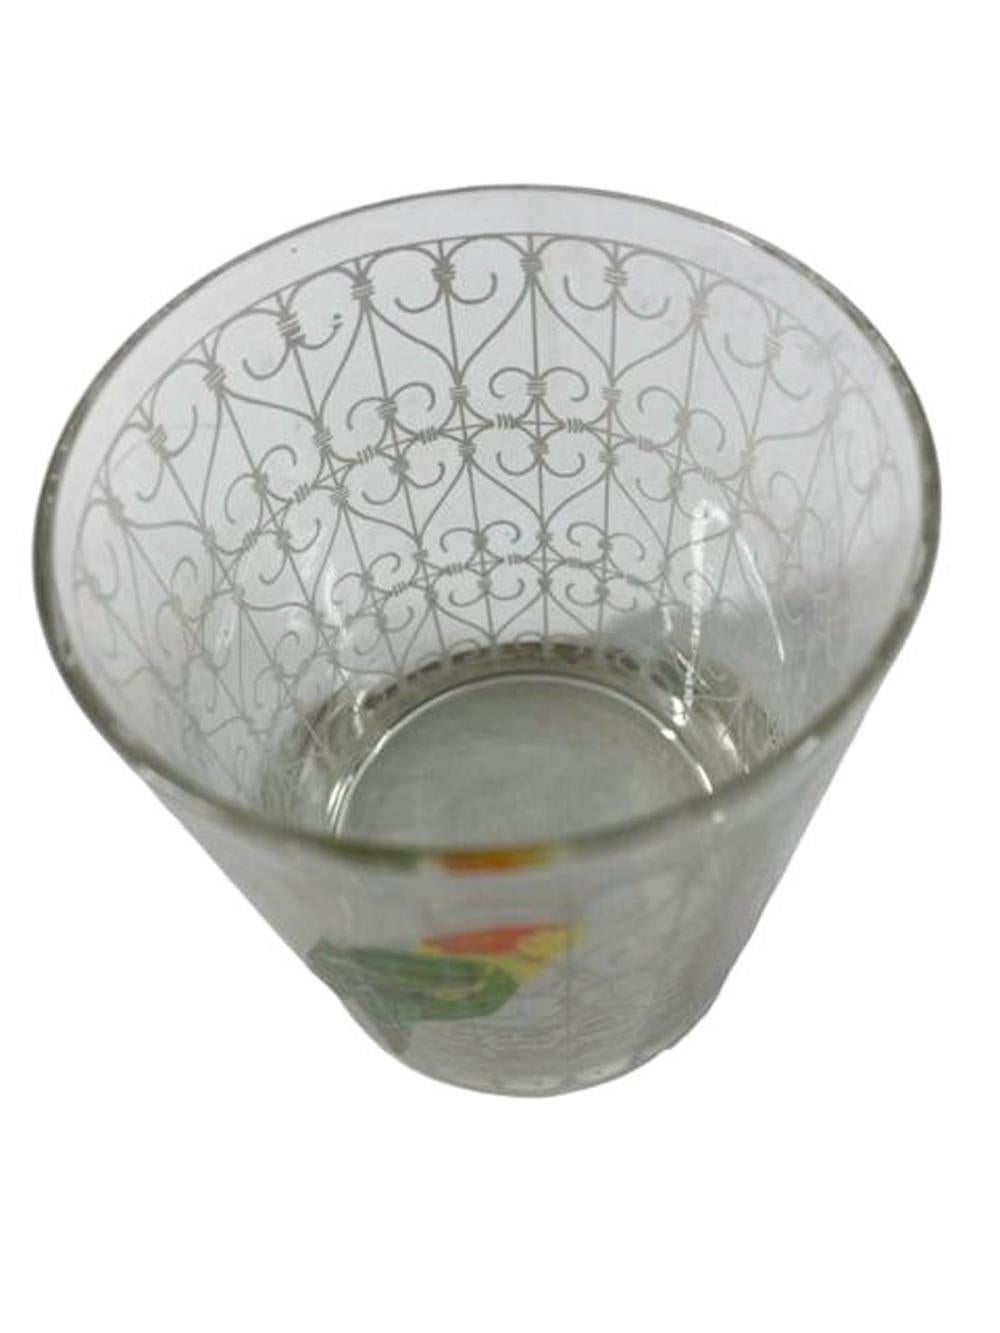 Six Vintage Rocks Glasses with a Parrot in a White Scrollwork Cage by Cera Glass In Good Condition For Sale In Chapel Hill, NC